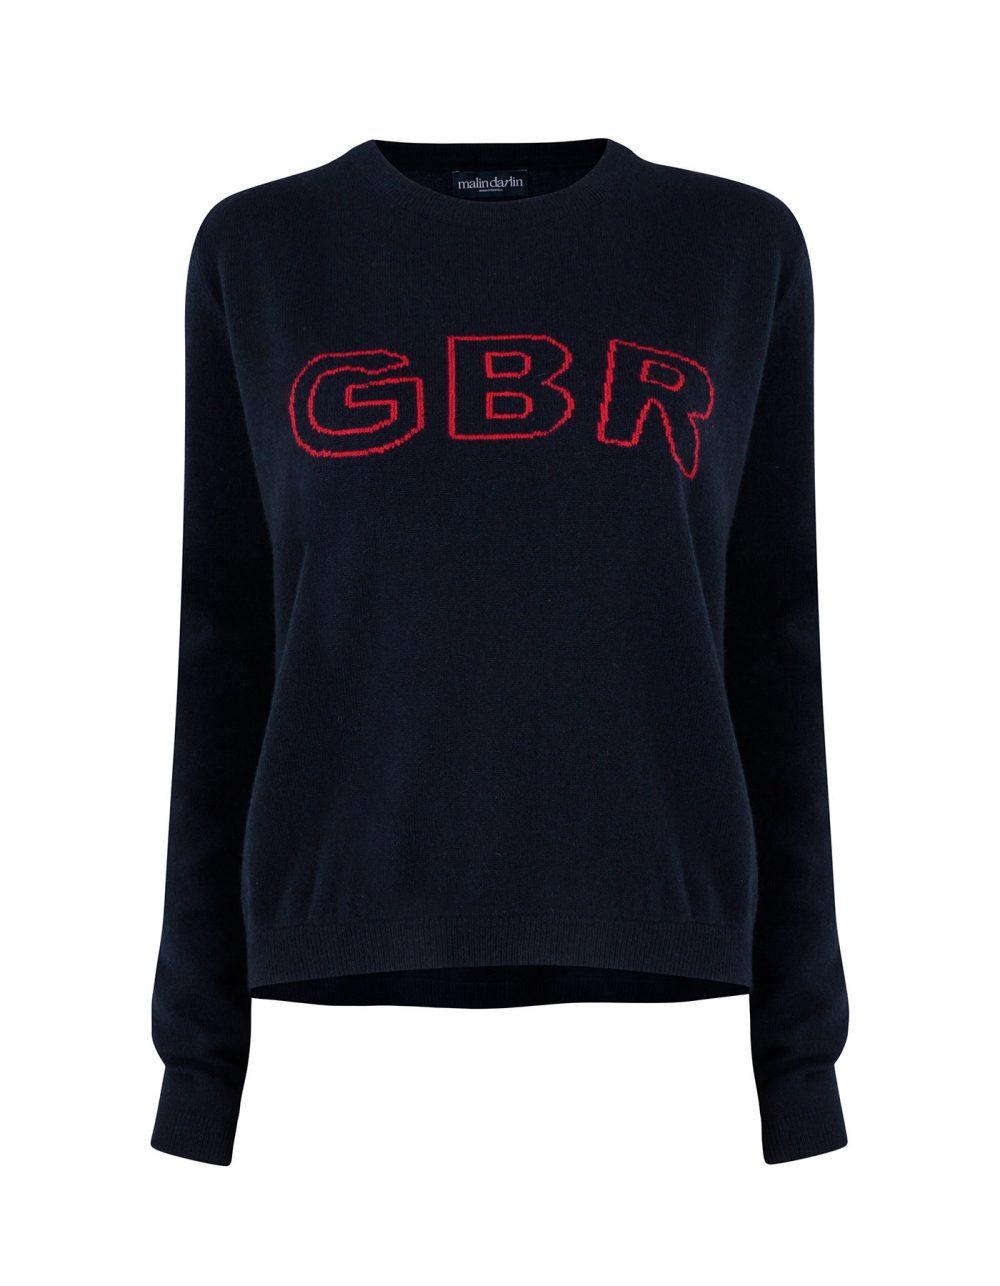 A GBR designer cashmere jumper, part of the malin darlin cashmere knitwear collection, isolated on a white background.